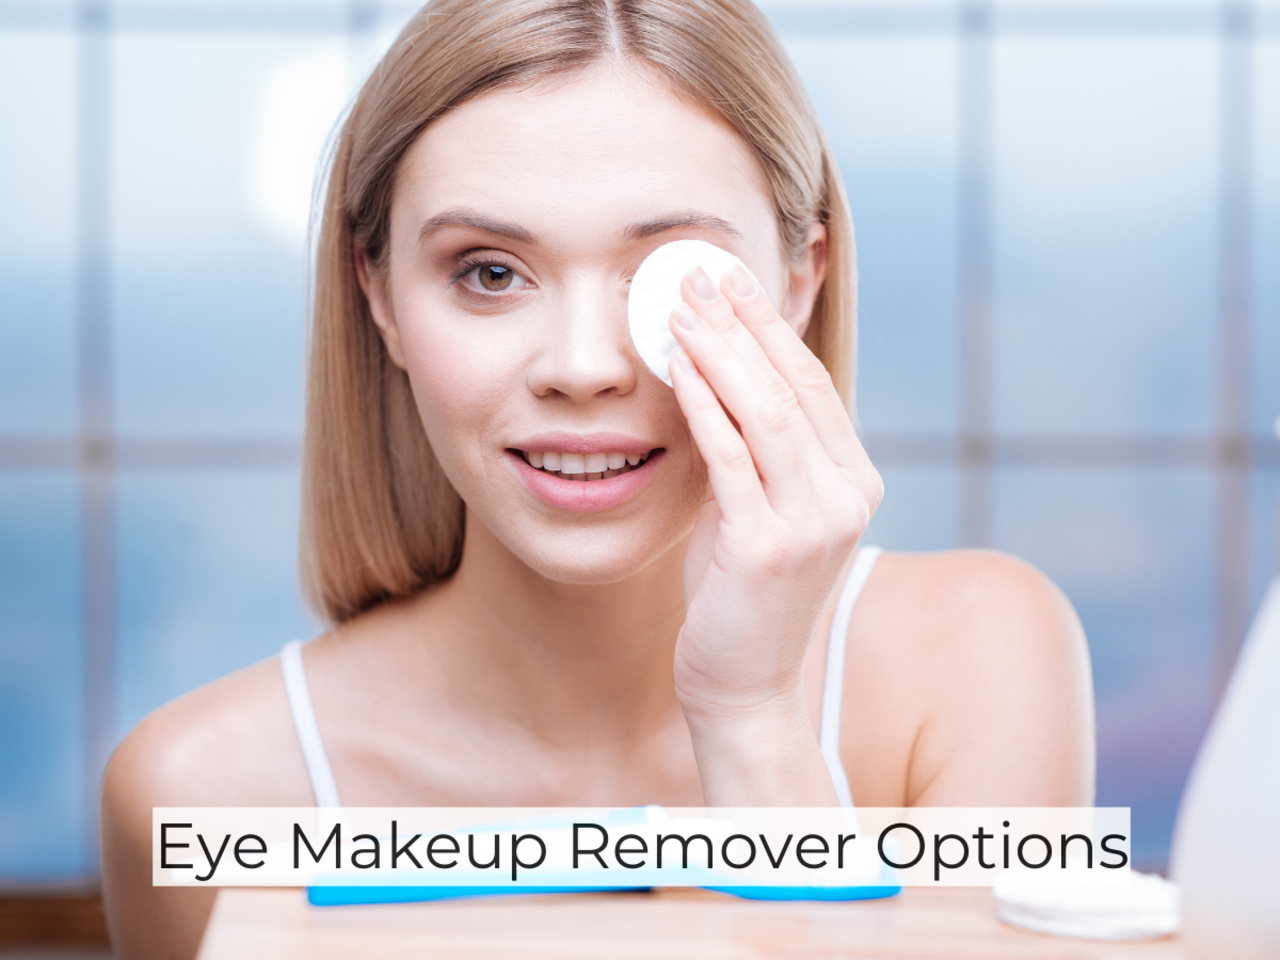 Eye Makeup Remover Options: Top Picks - Times of India 2023)